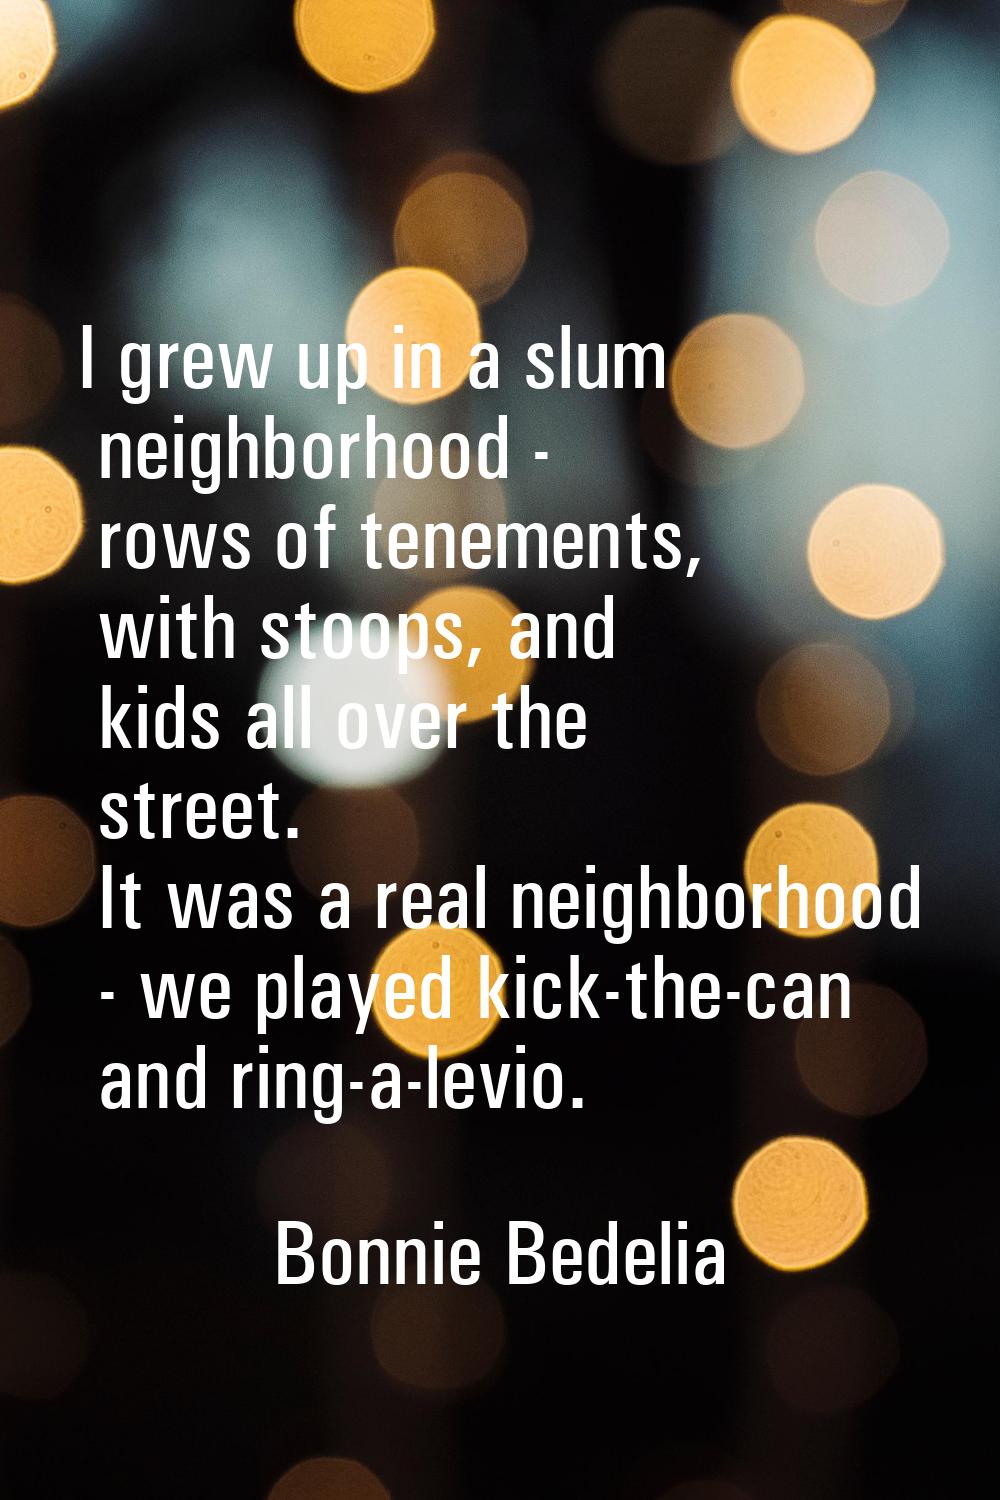 I grew up in a slum neighborhood - rows of tenements, with stoops, and kids all over the street. It